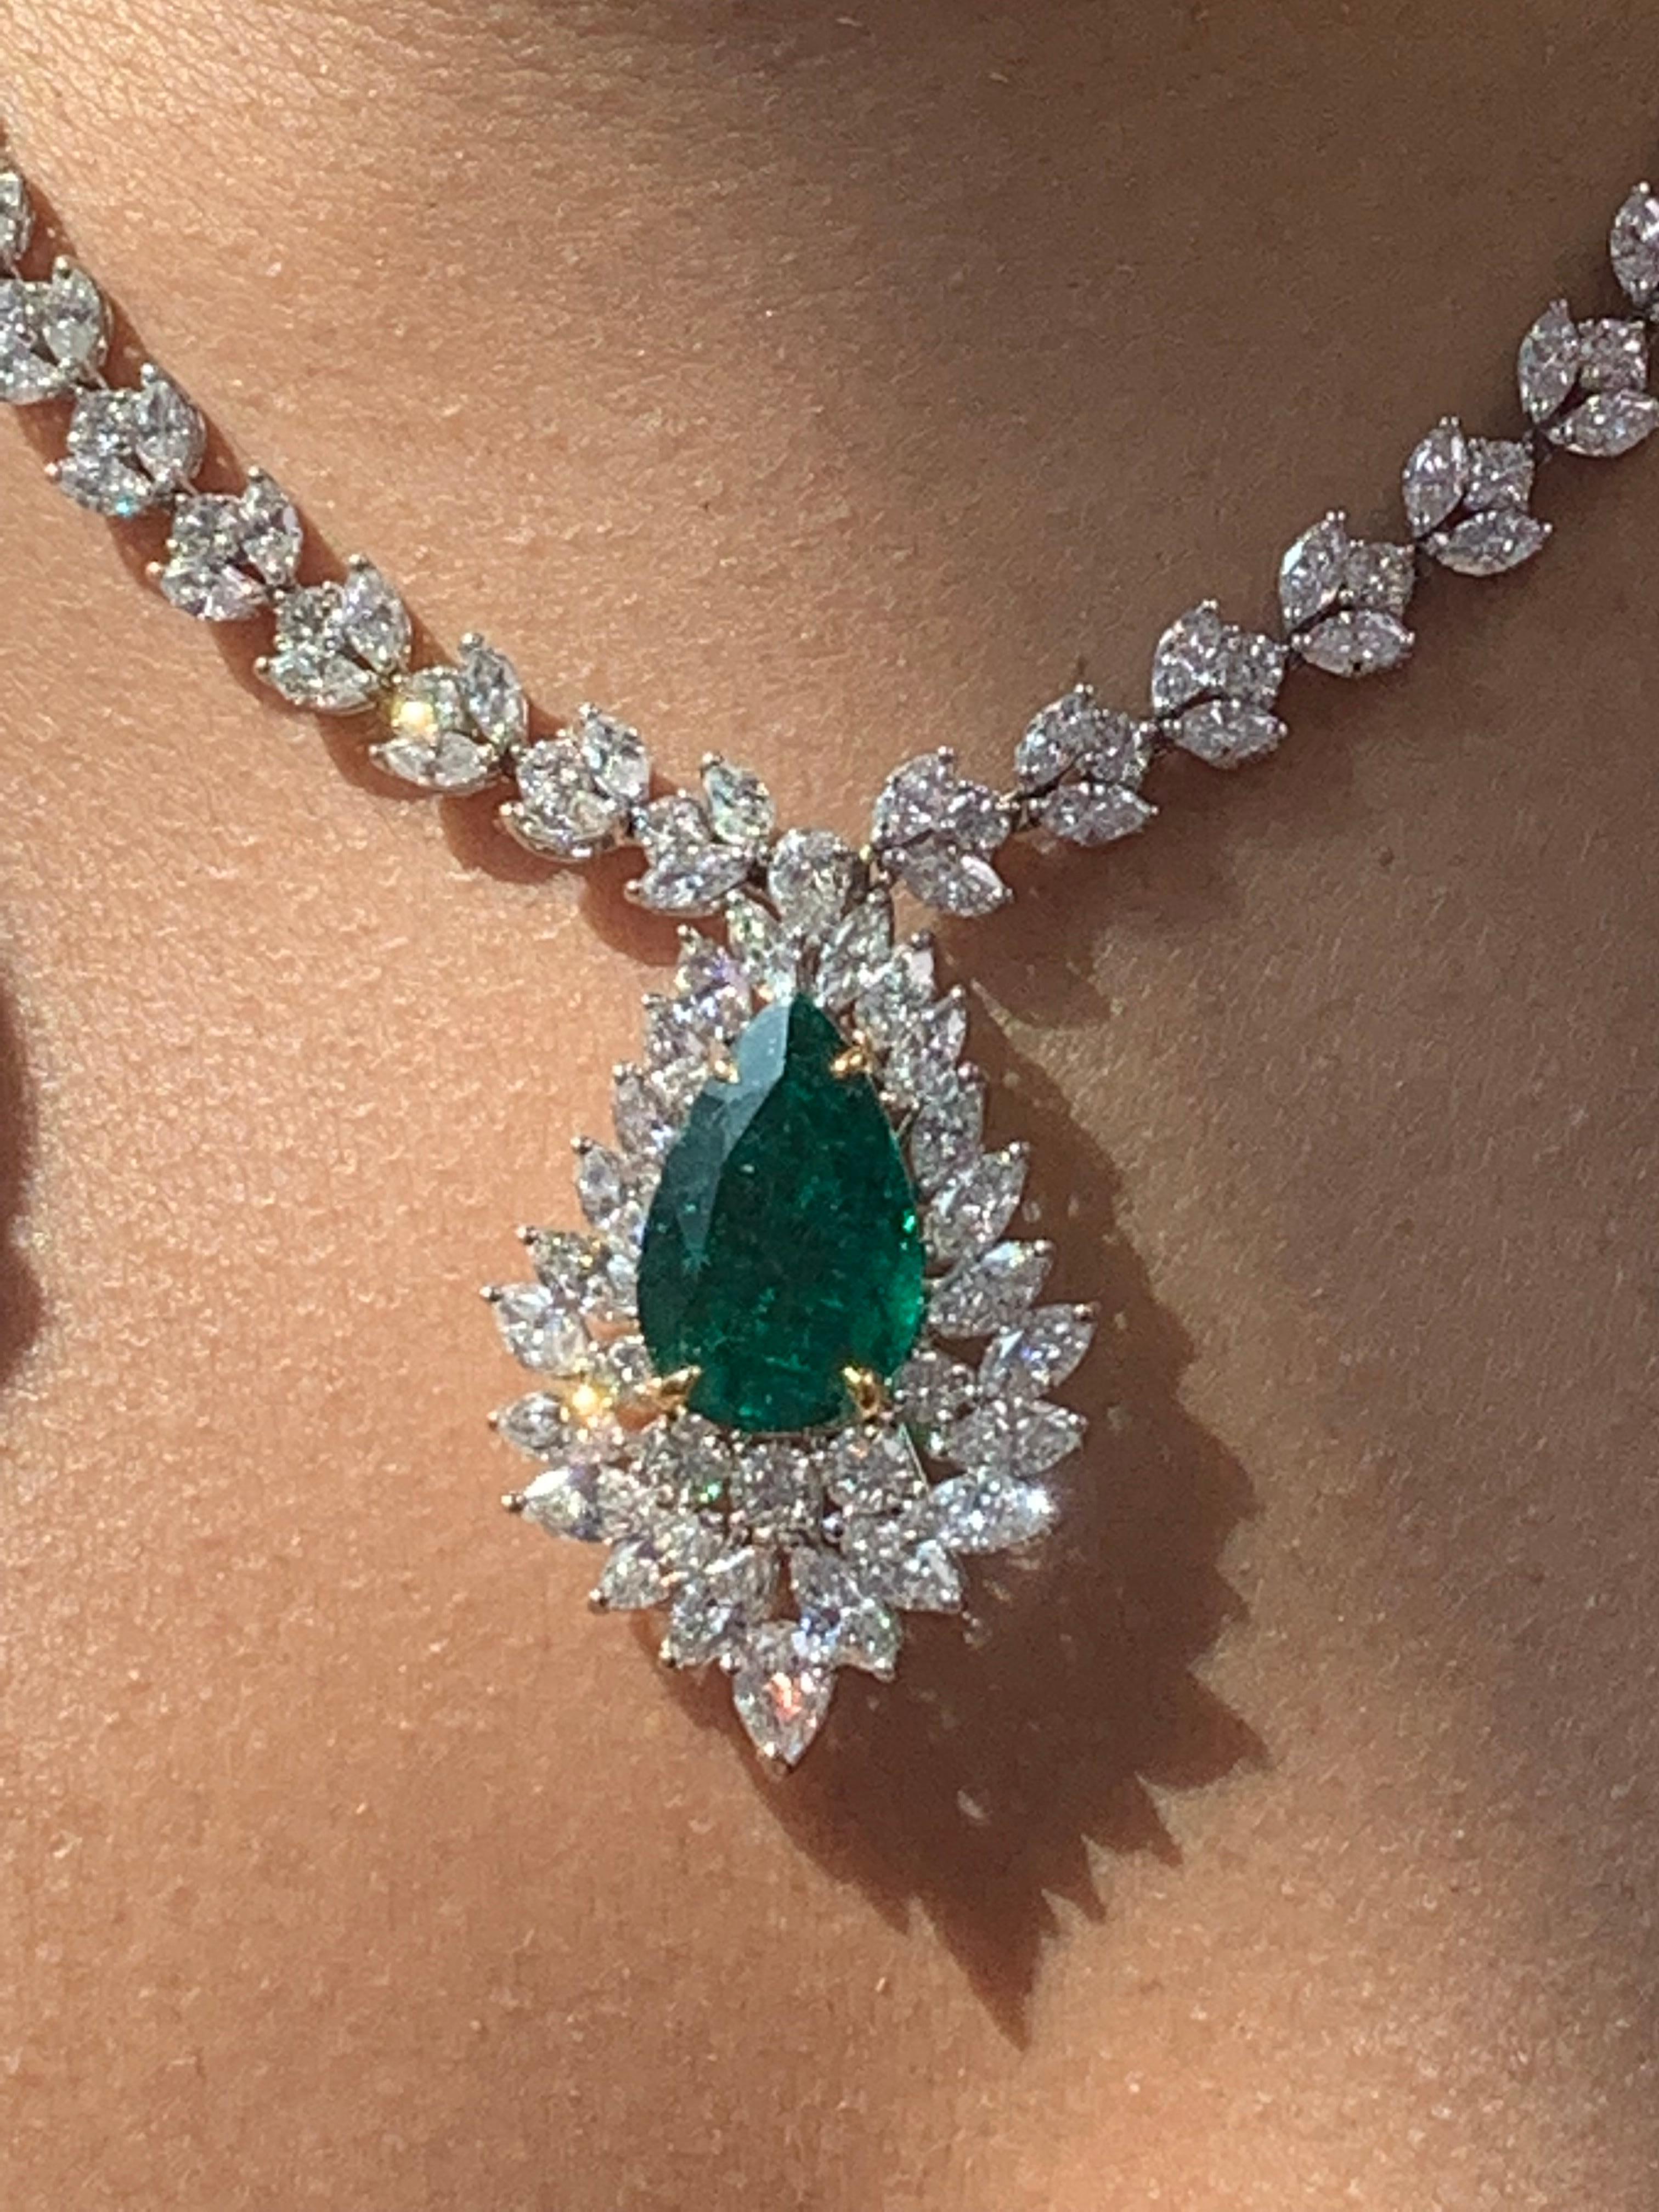 A unique and chic necklace showcasing a drop pendant with an 8.96-carat pear shape emerald, surrounded by Marquise and Round brilliant diamonds. Designed with a young, feminine, and understated woman in mind. A very contemporary aesthetic that